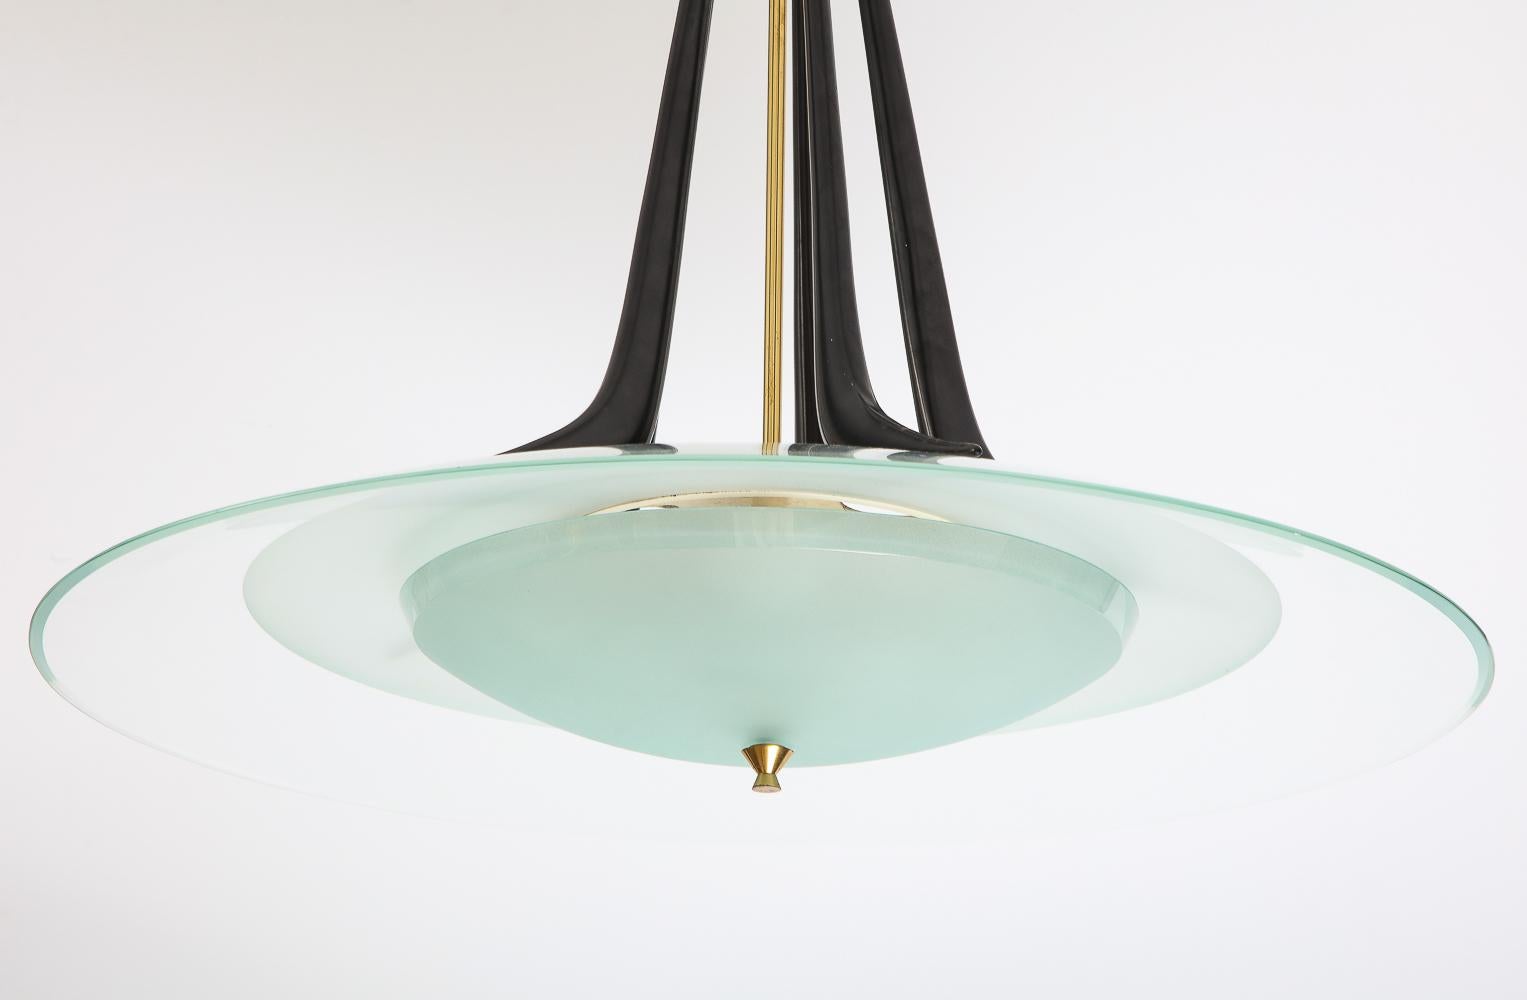 Lacquered metal, frosted glass, clear glass and brass. A rare example by Max Ingrand with sculptural black-lacquered supports at the top. There are five E26 sockets.